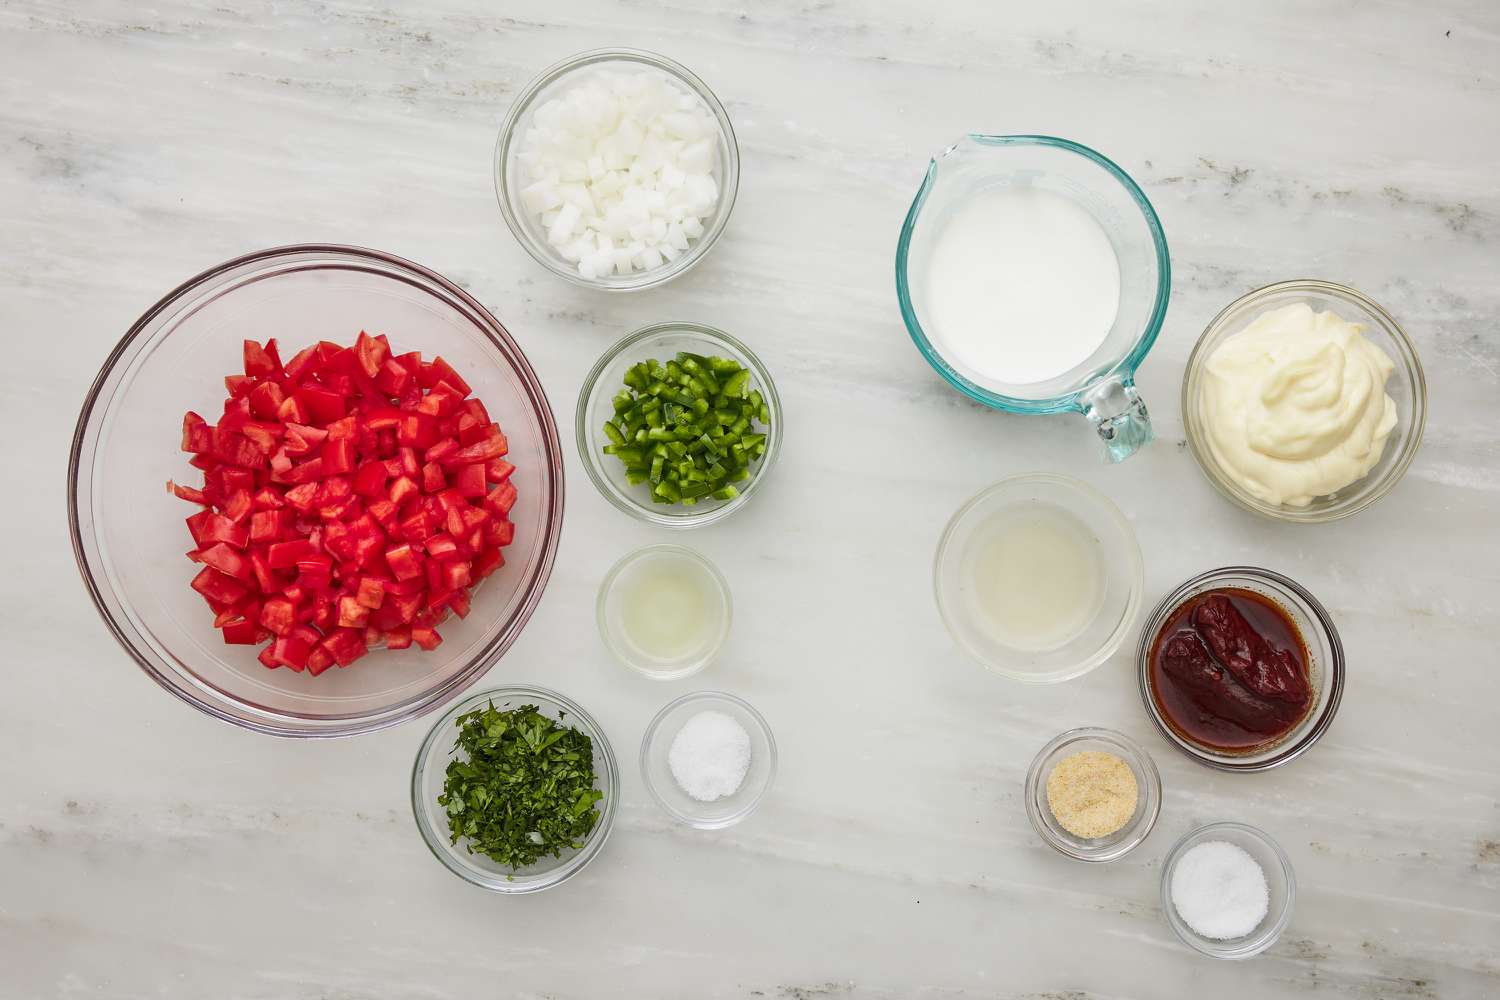 chipotle sauce and pico salsa ingredients gathered